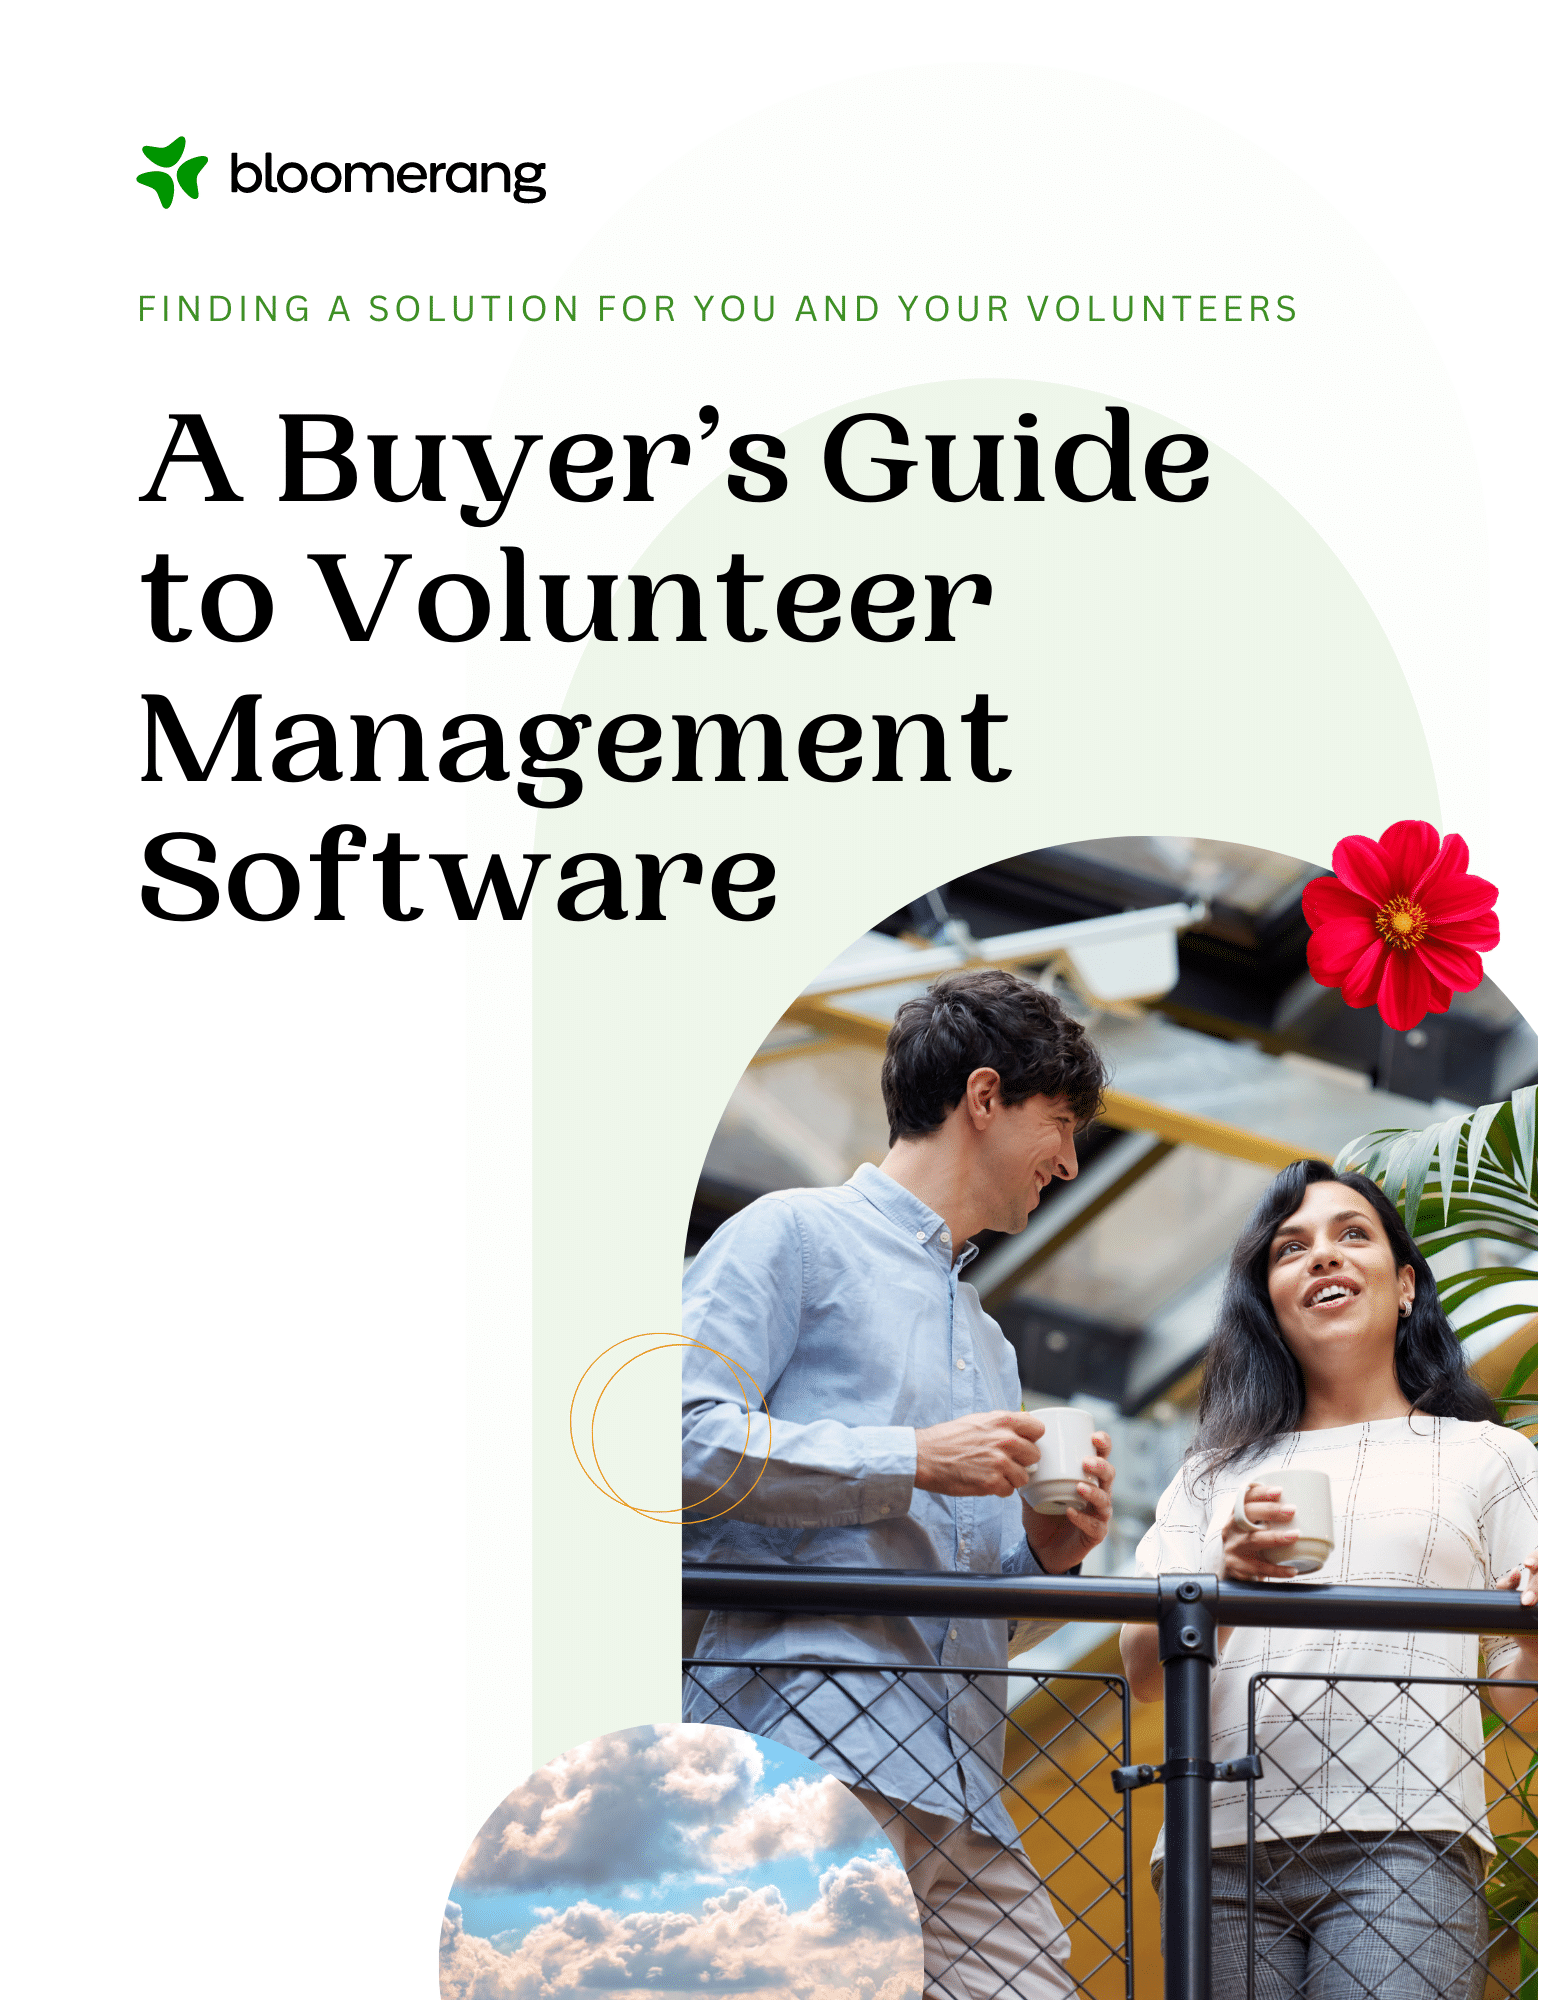 The Buyer’s Guide to Volunteer Management Software